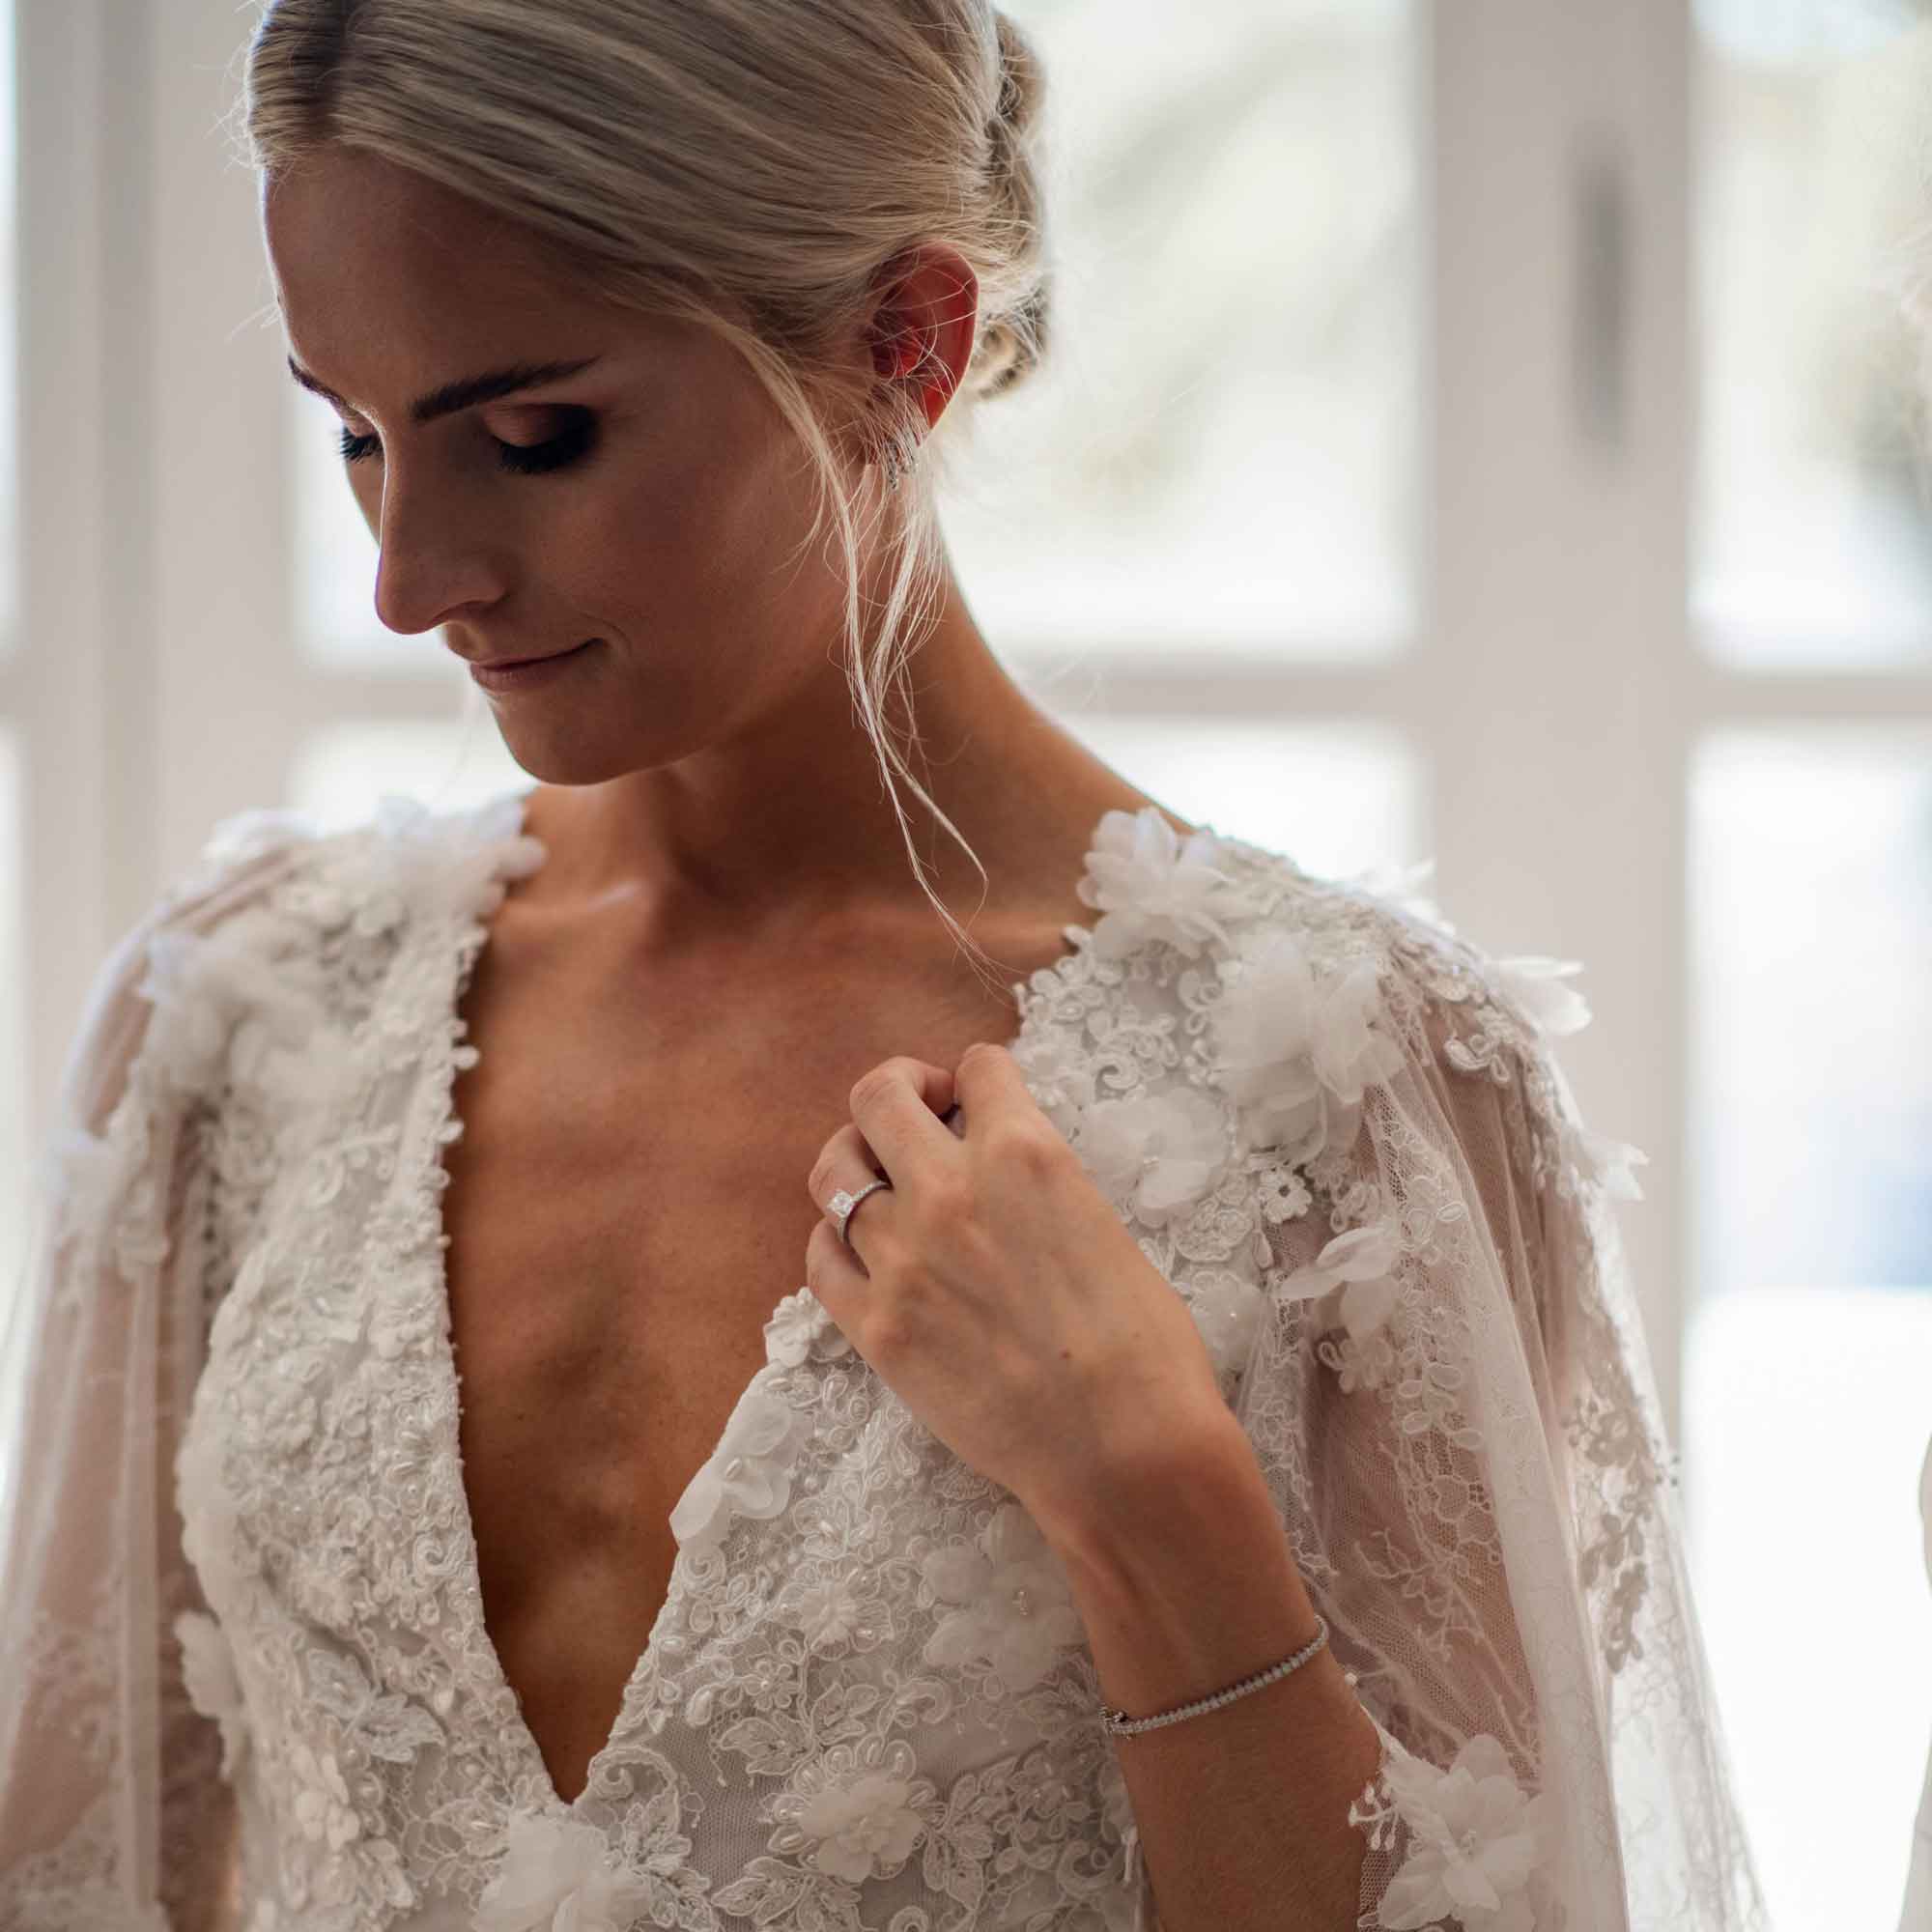 Finding Meaning in Tradition: What to wear for your wedding day